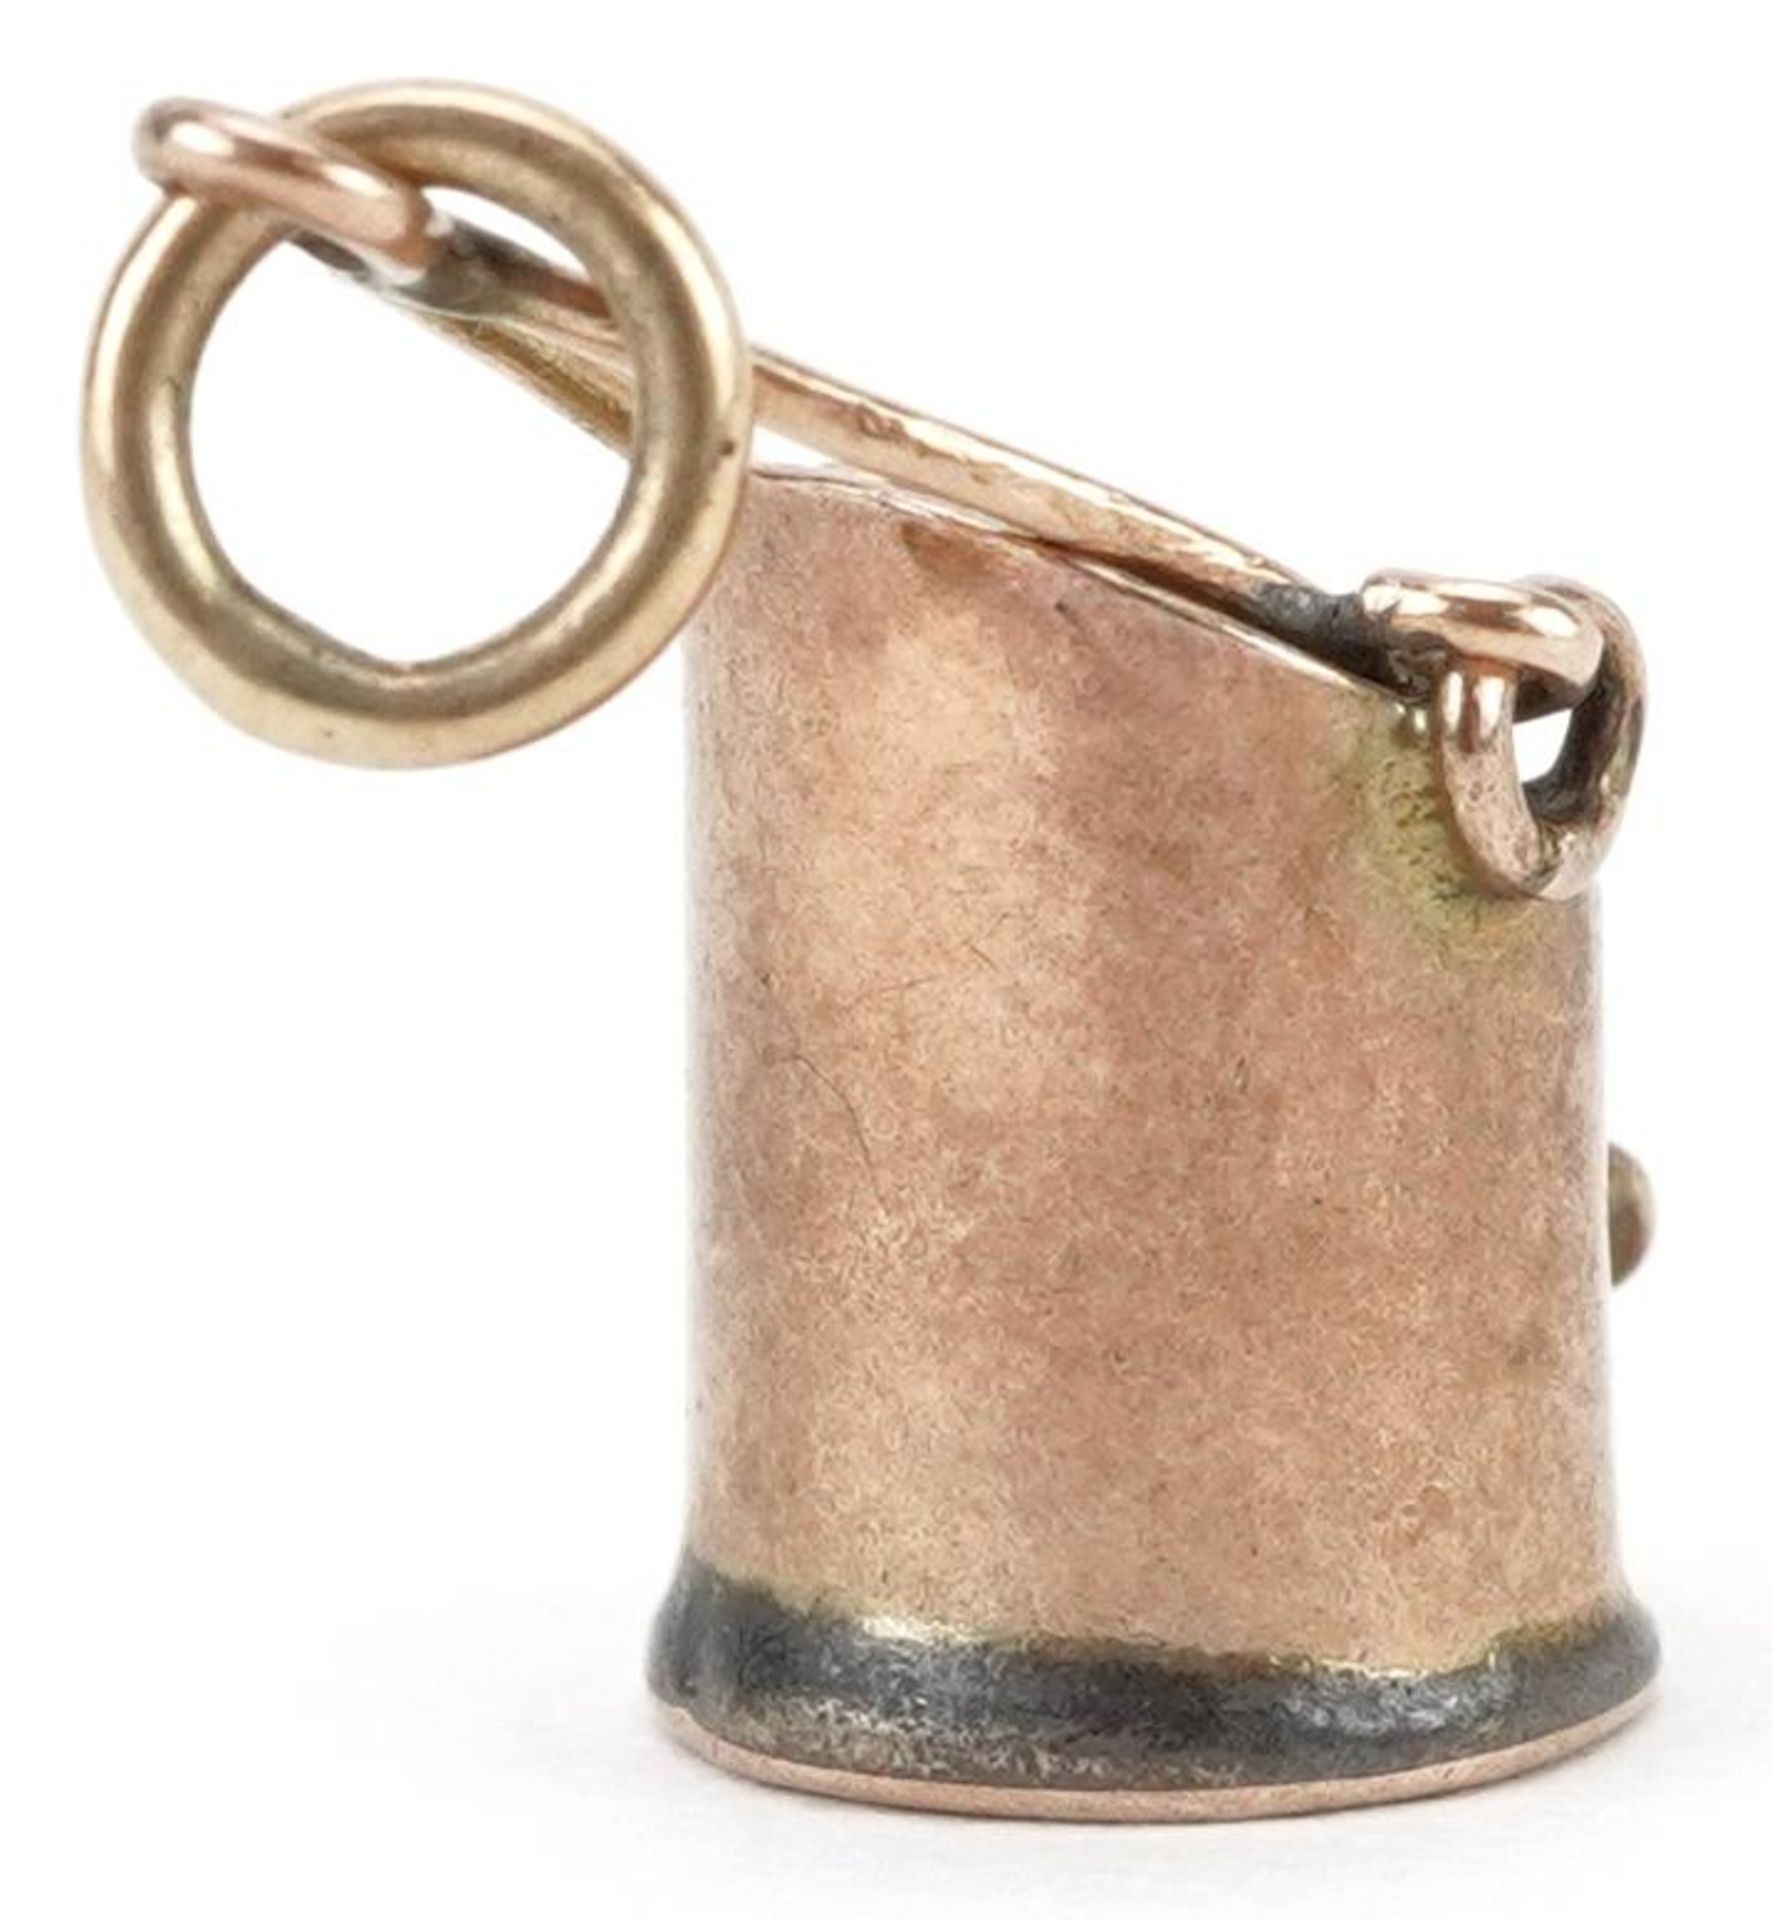 9ct gold charm in the form of a coal bucket with swing handle, 1.8cm high, 0.9g - Image 2 of 3